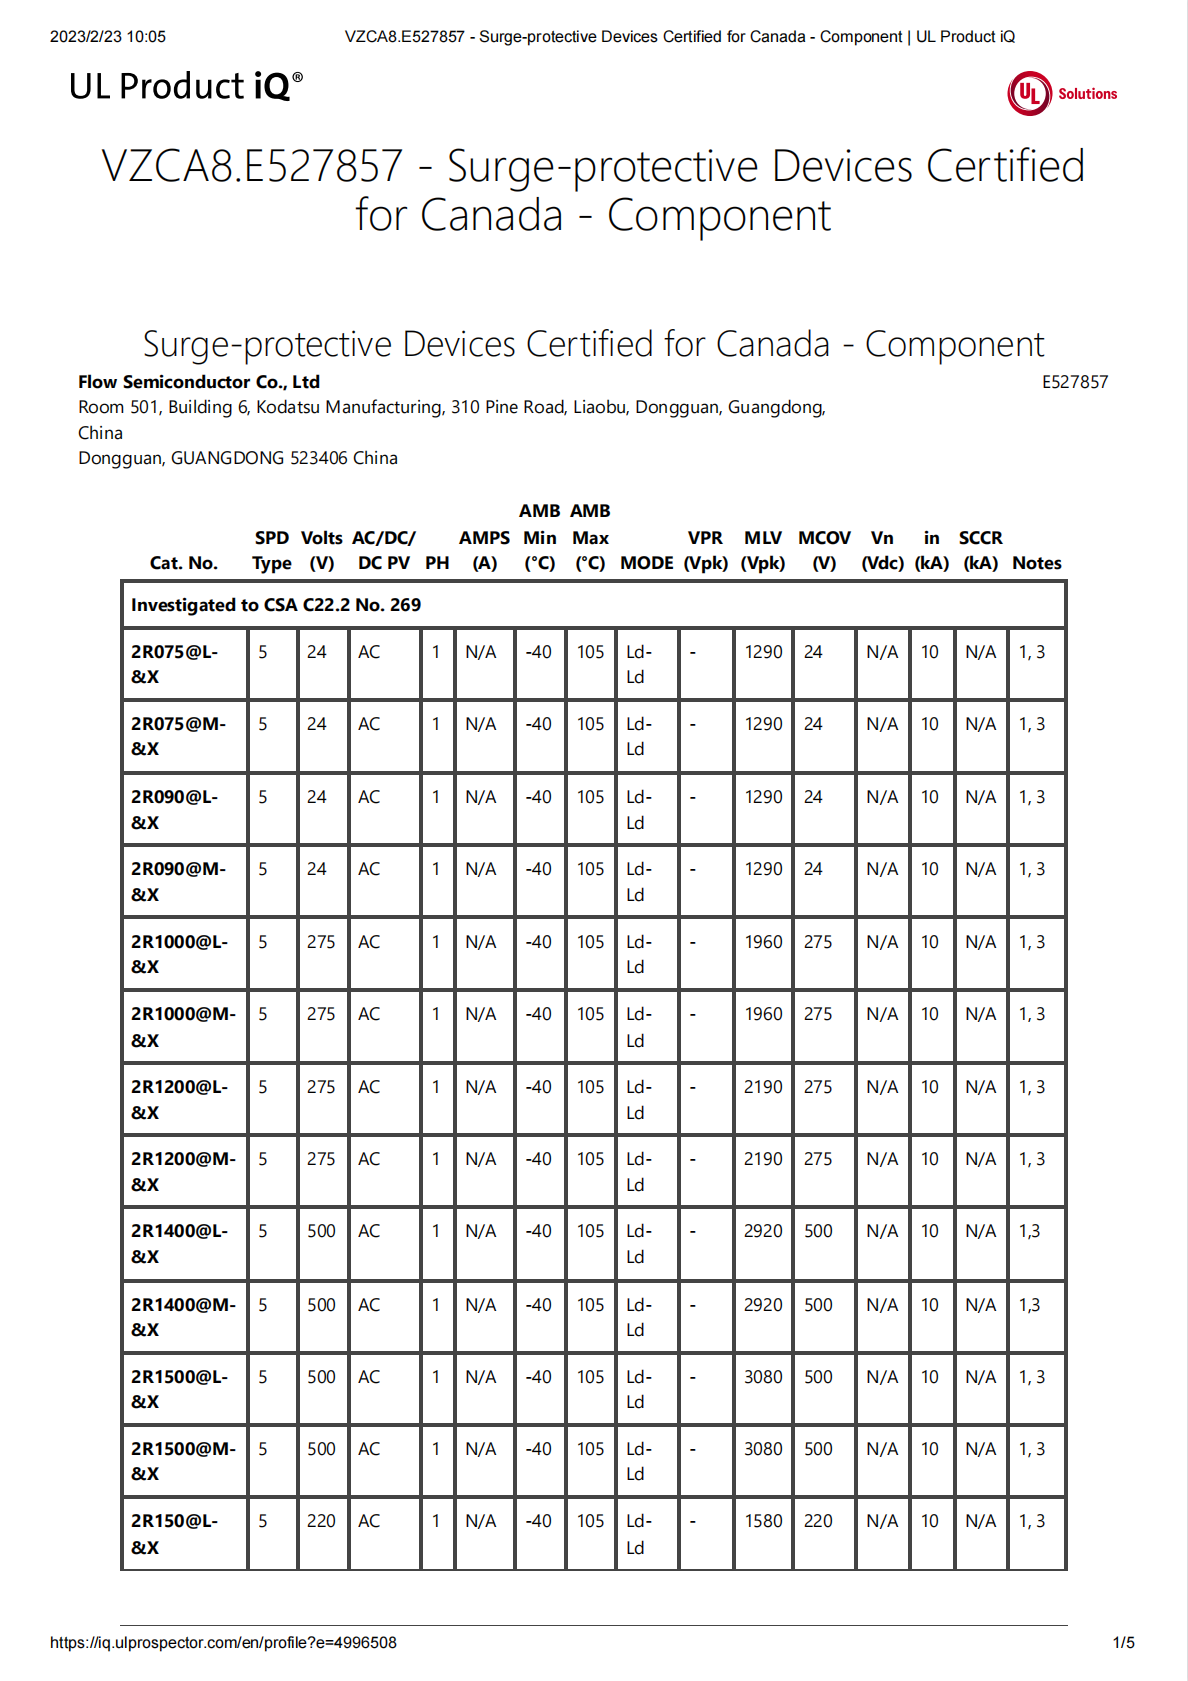 GDT安规认证（VZCA8.E527857 - Surge-protective Devices Certified for Canada - Component）